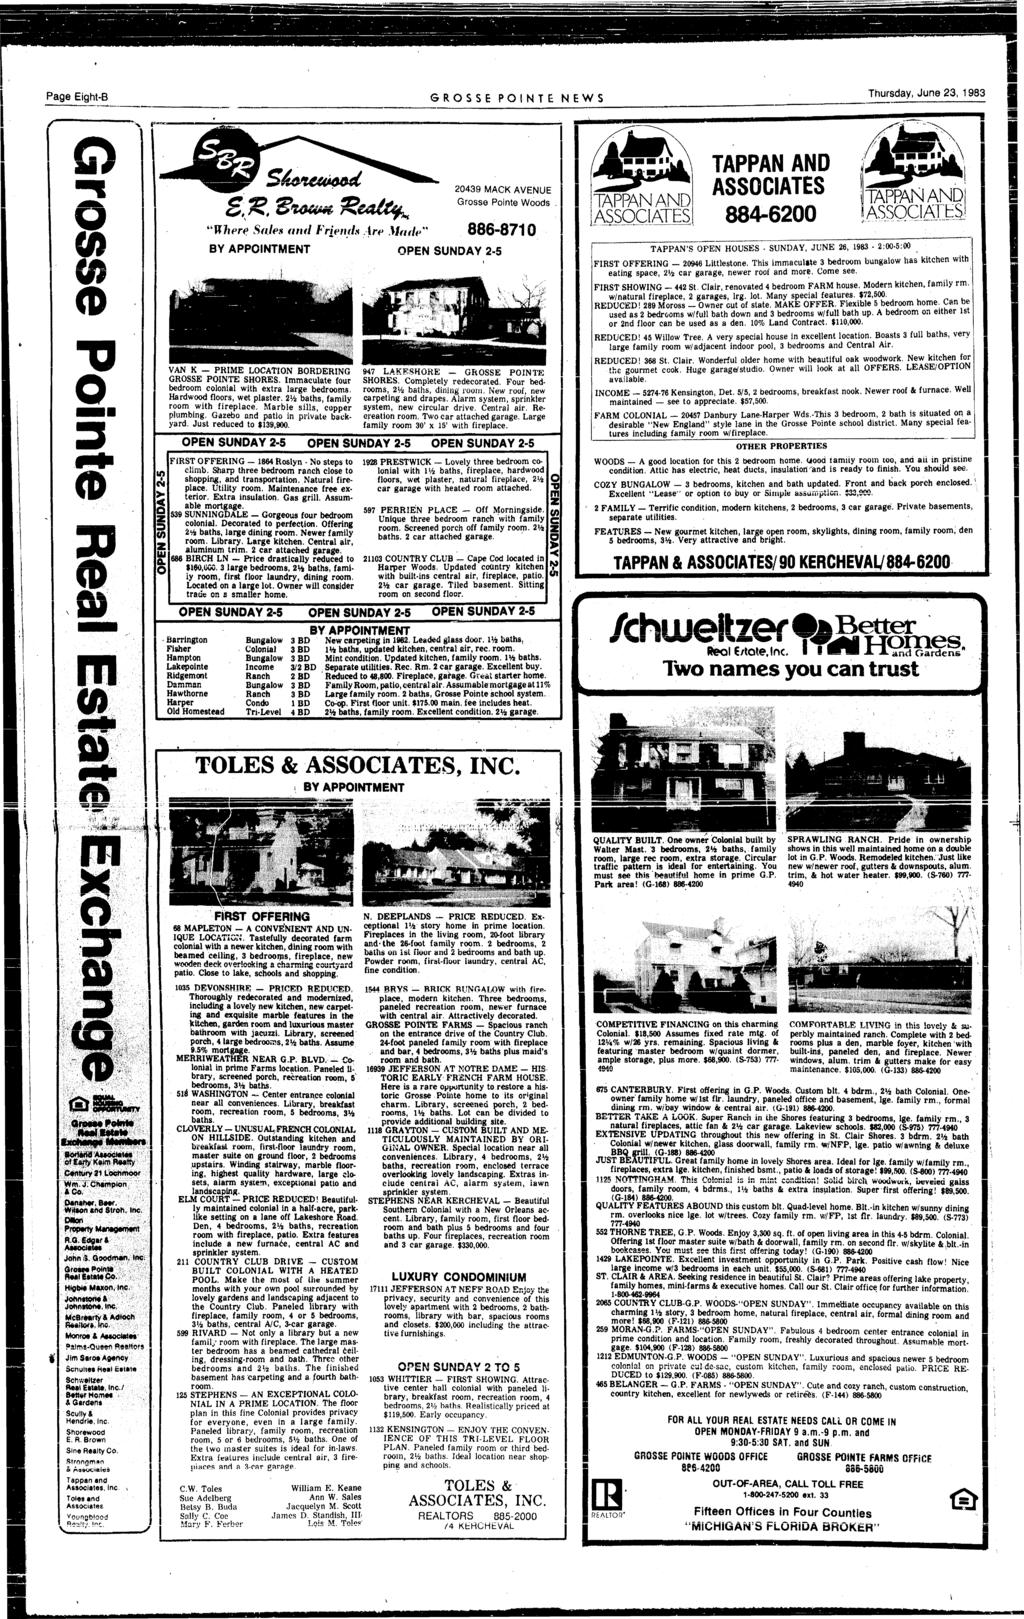 Page Eght-B SROSSE PONTE NEWS Thursday, June 23, 1983 M r^sw -** 20439 MACK AVENUE Grosse Ponte Woods "Uhere Sales and Frends Are Made' 886-8710 BY APPONTMENT OPEN SUNDAY 2-5 VAN K - PRME LOCATON